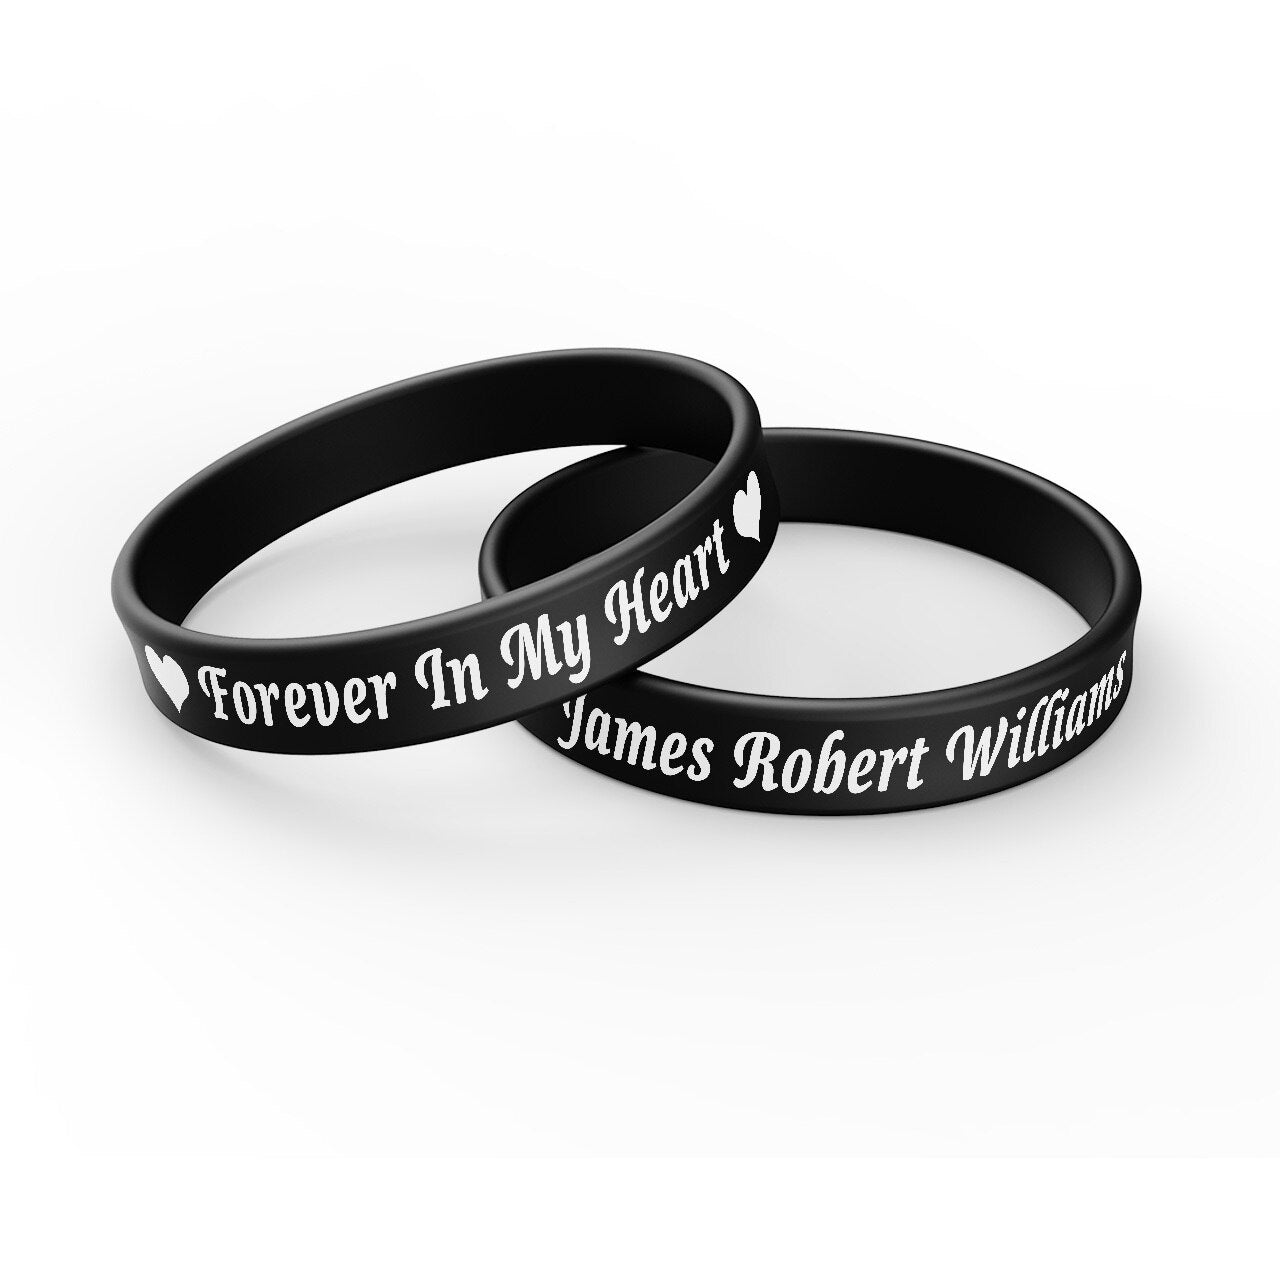 Personalized In Loving Memory Silicone Bracelet - Forever In My Heart (Pack of 10).